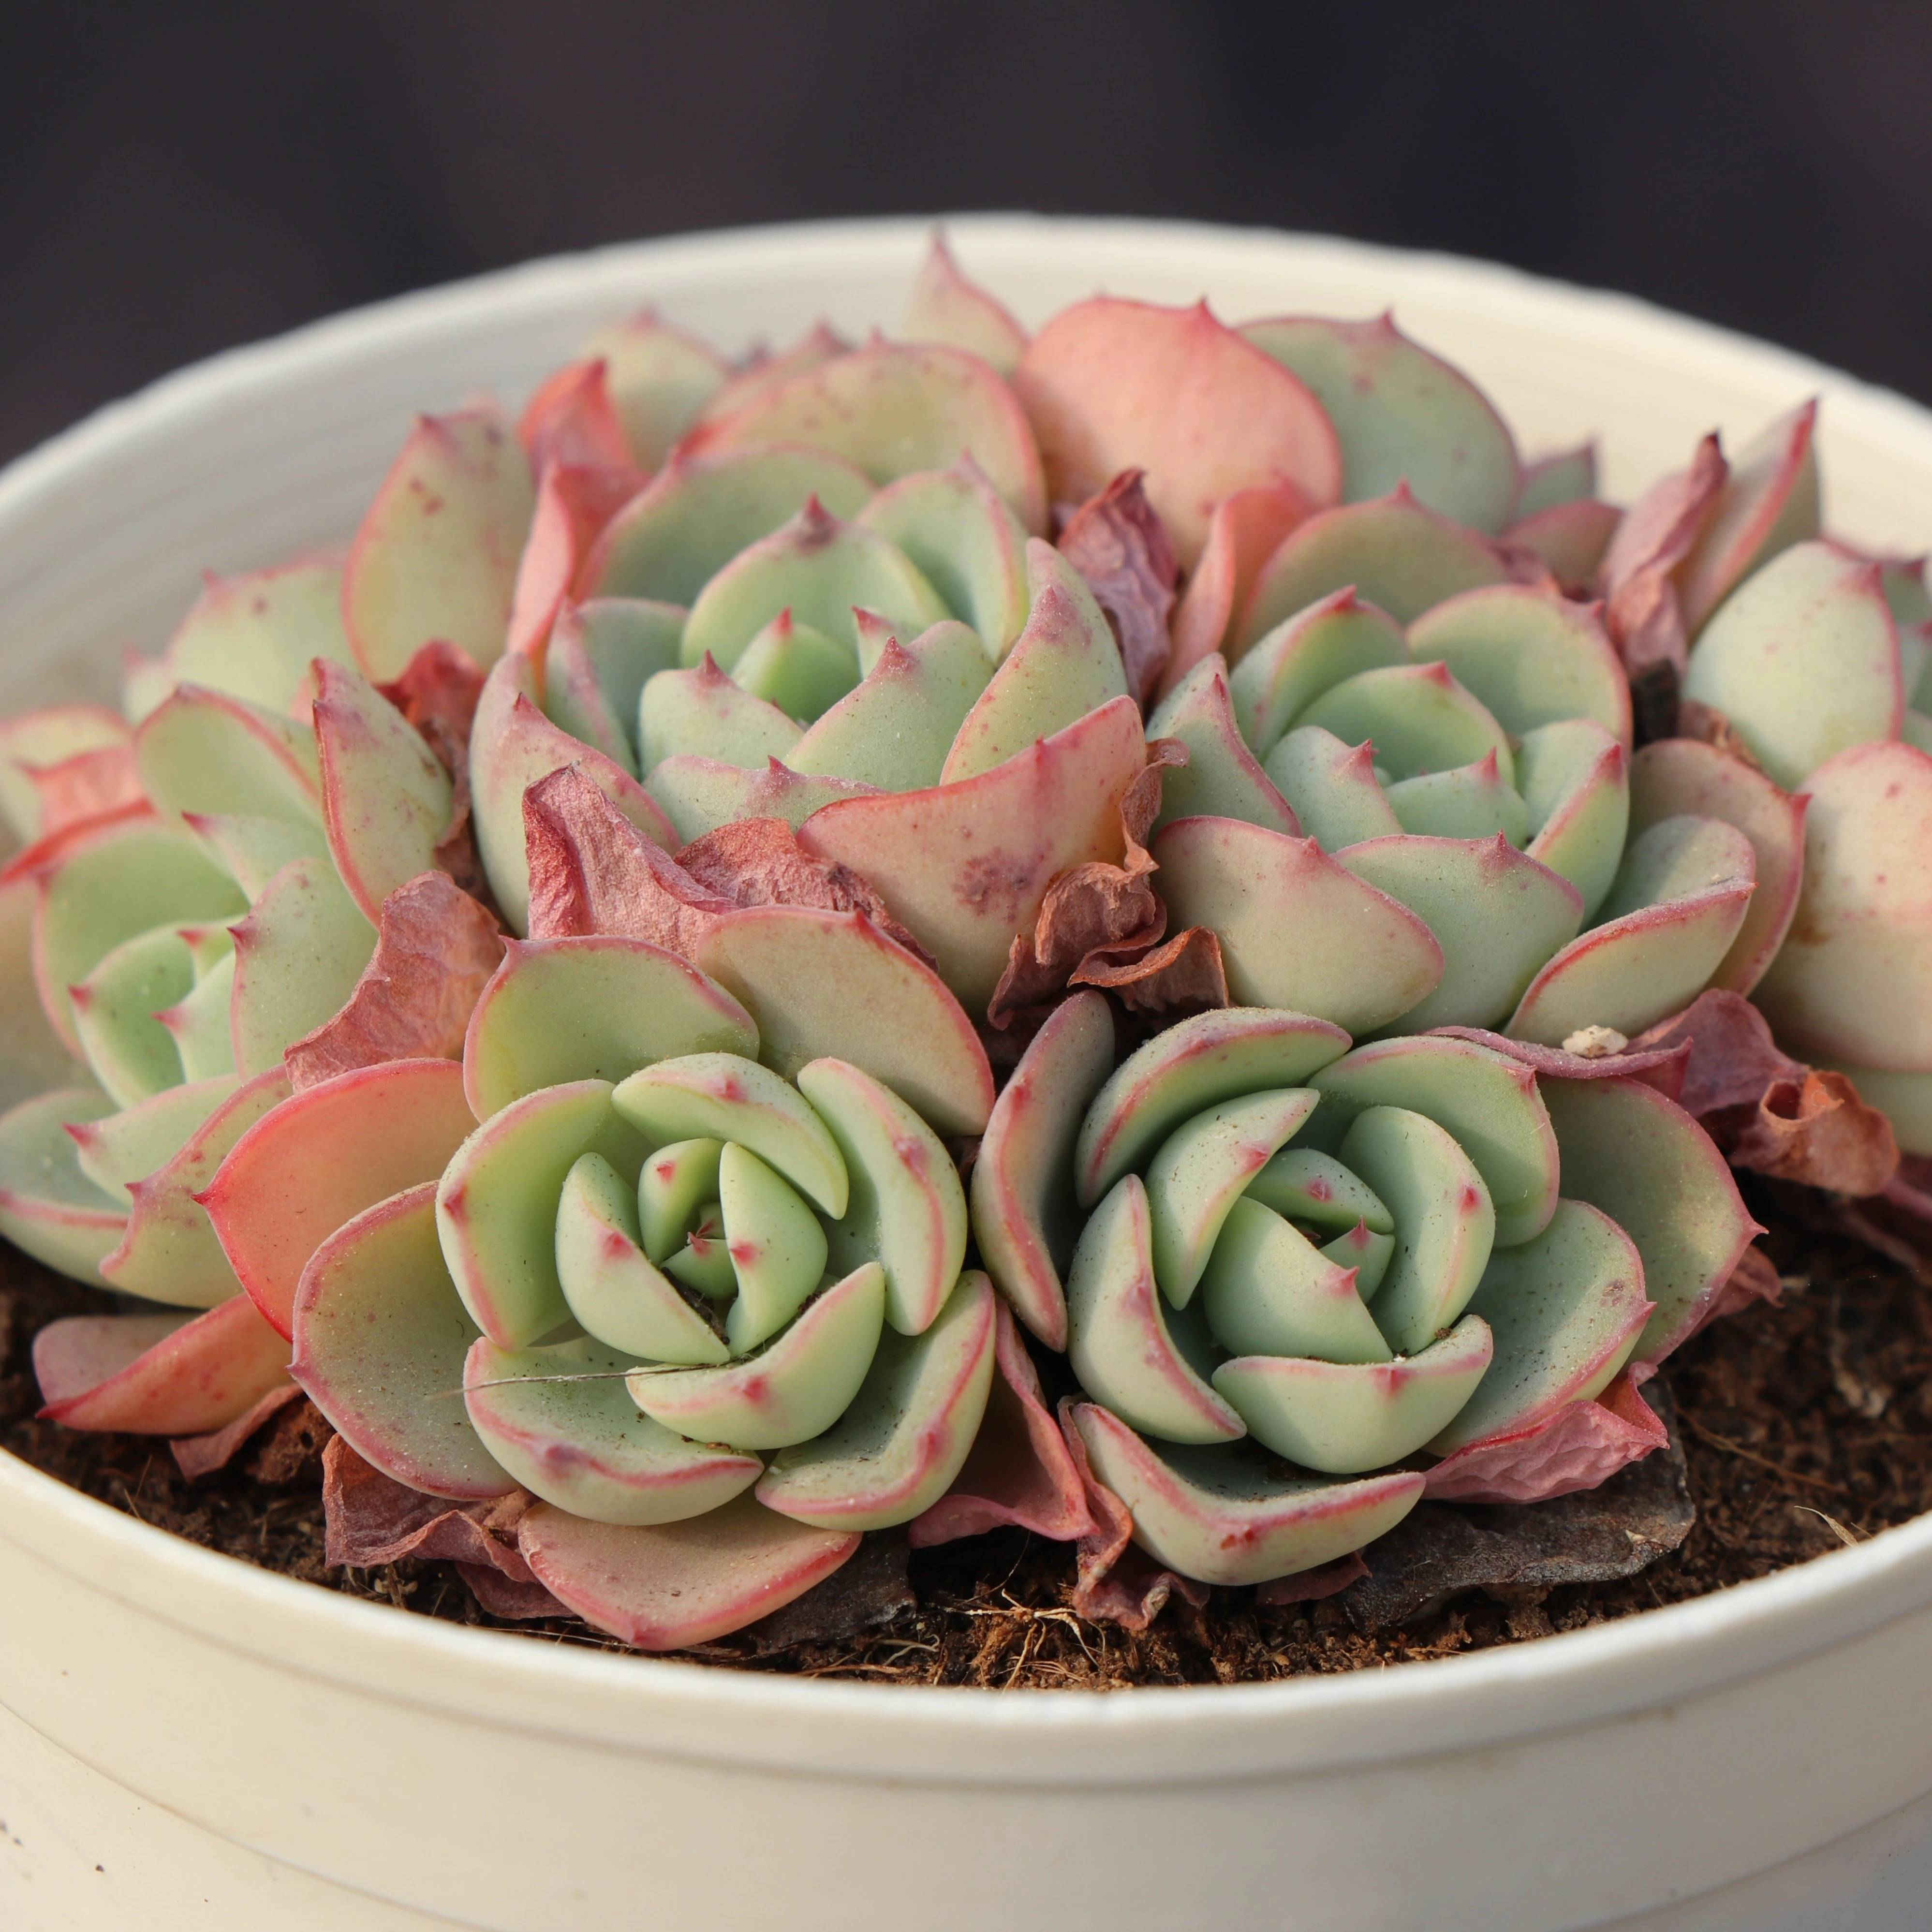 Easy-care live natural succulent plants with attractive price